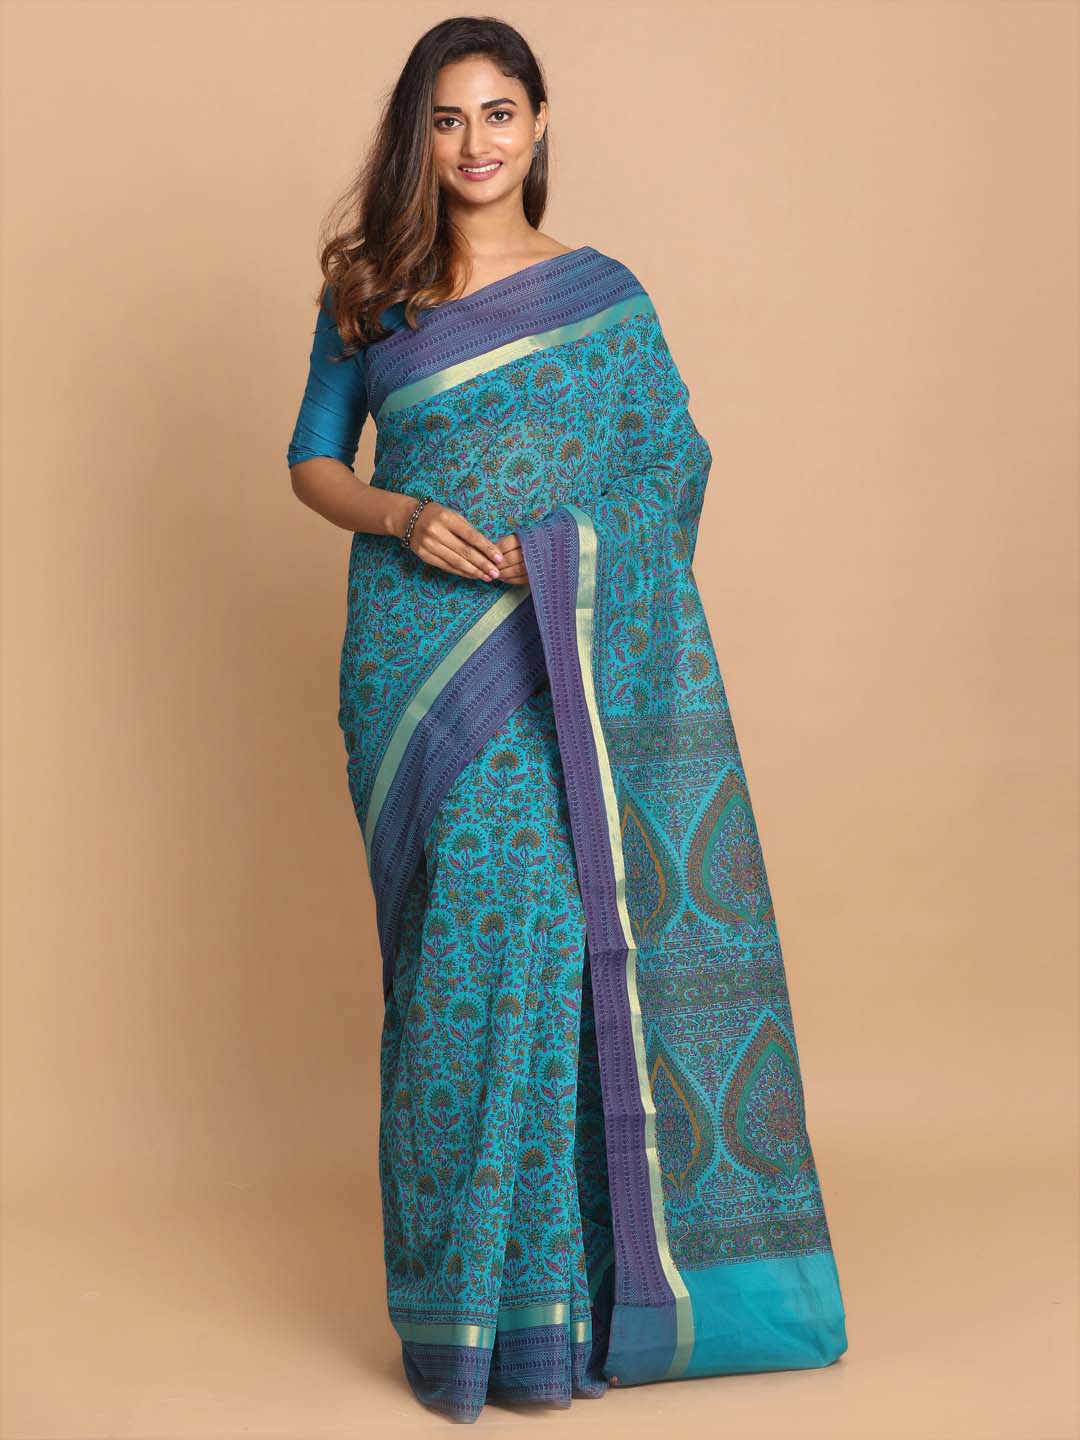 Indethnic Printed Cotton Blend Saree in Turquoise Blue - View 1